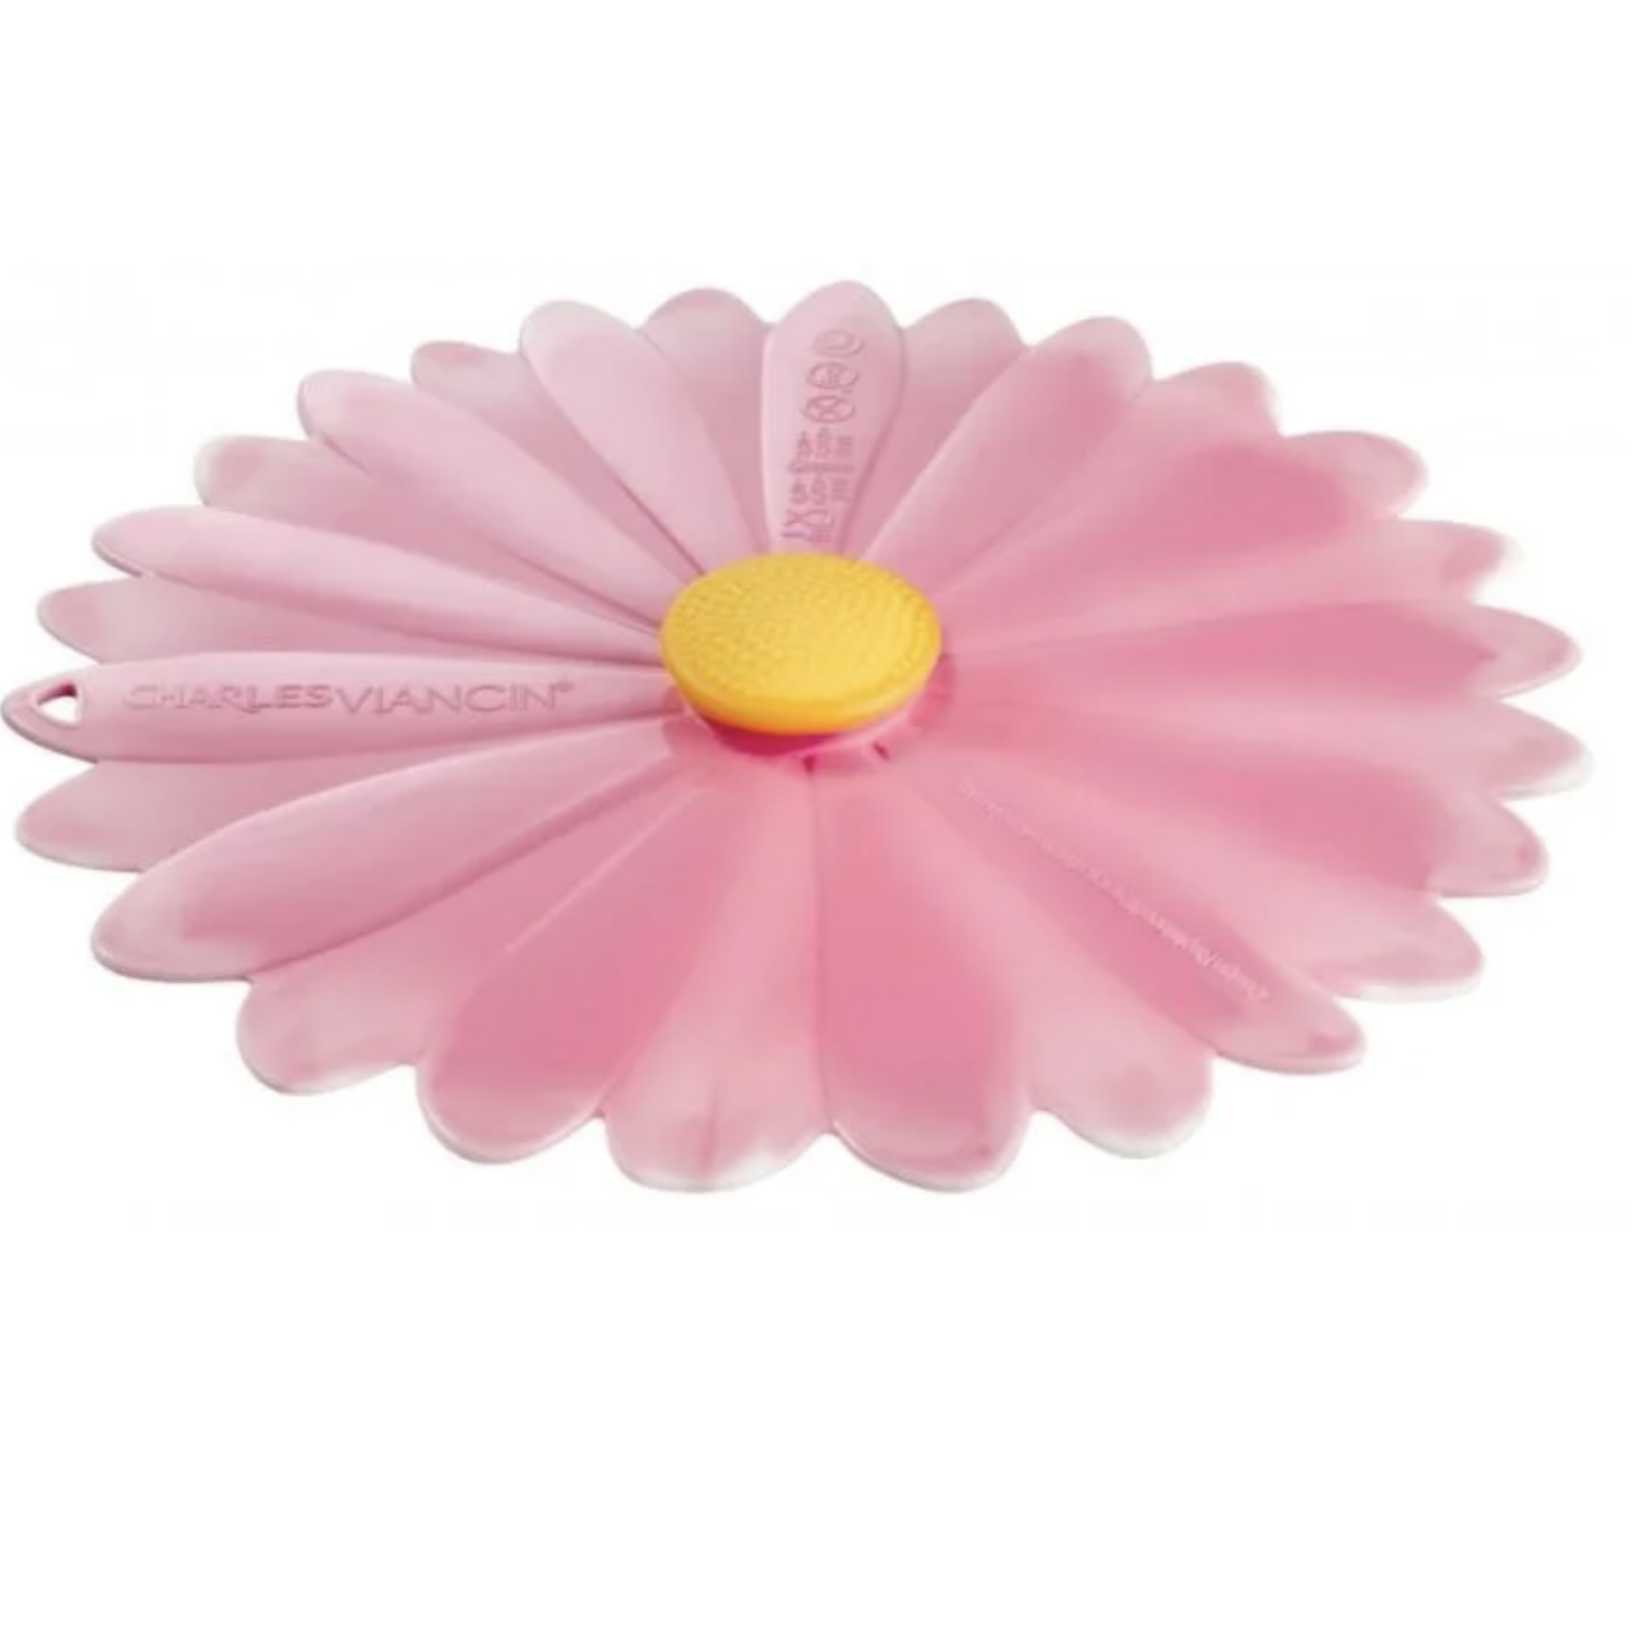 Charles Viancin Daisy Lid, 9", Pink / White